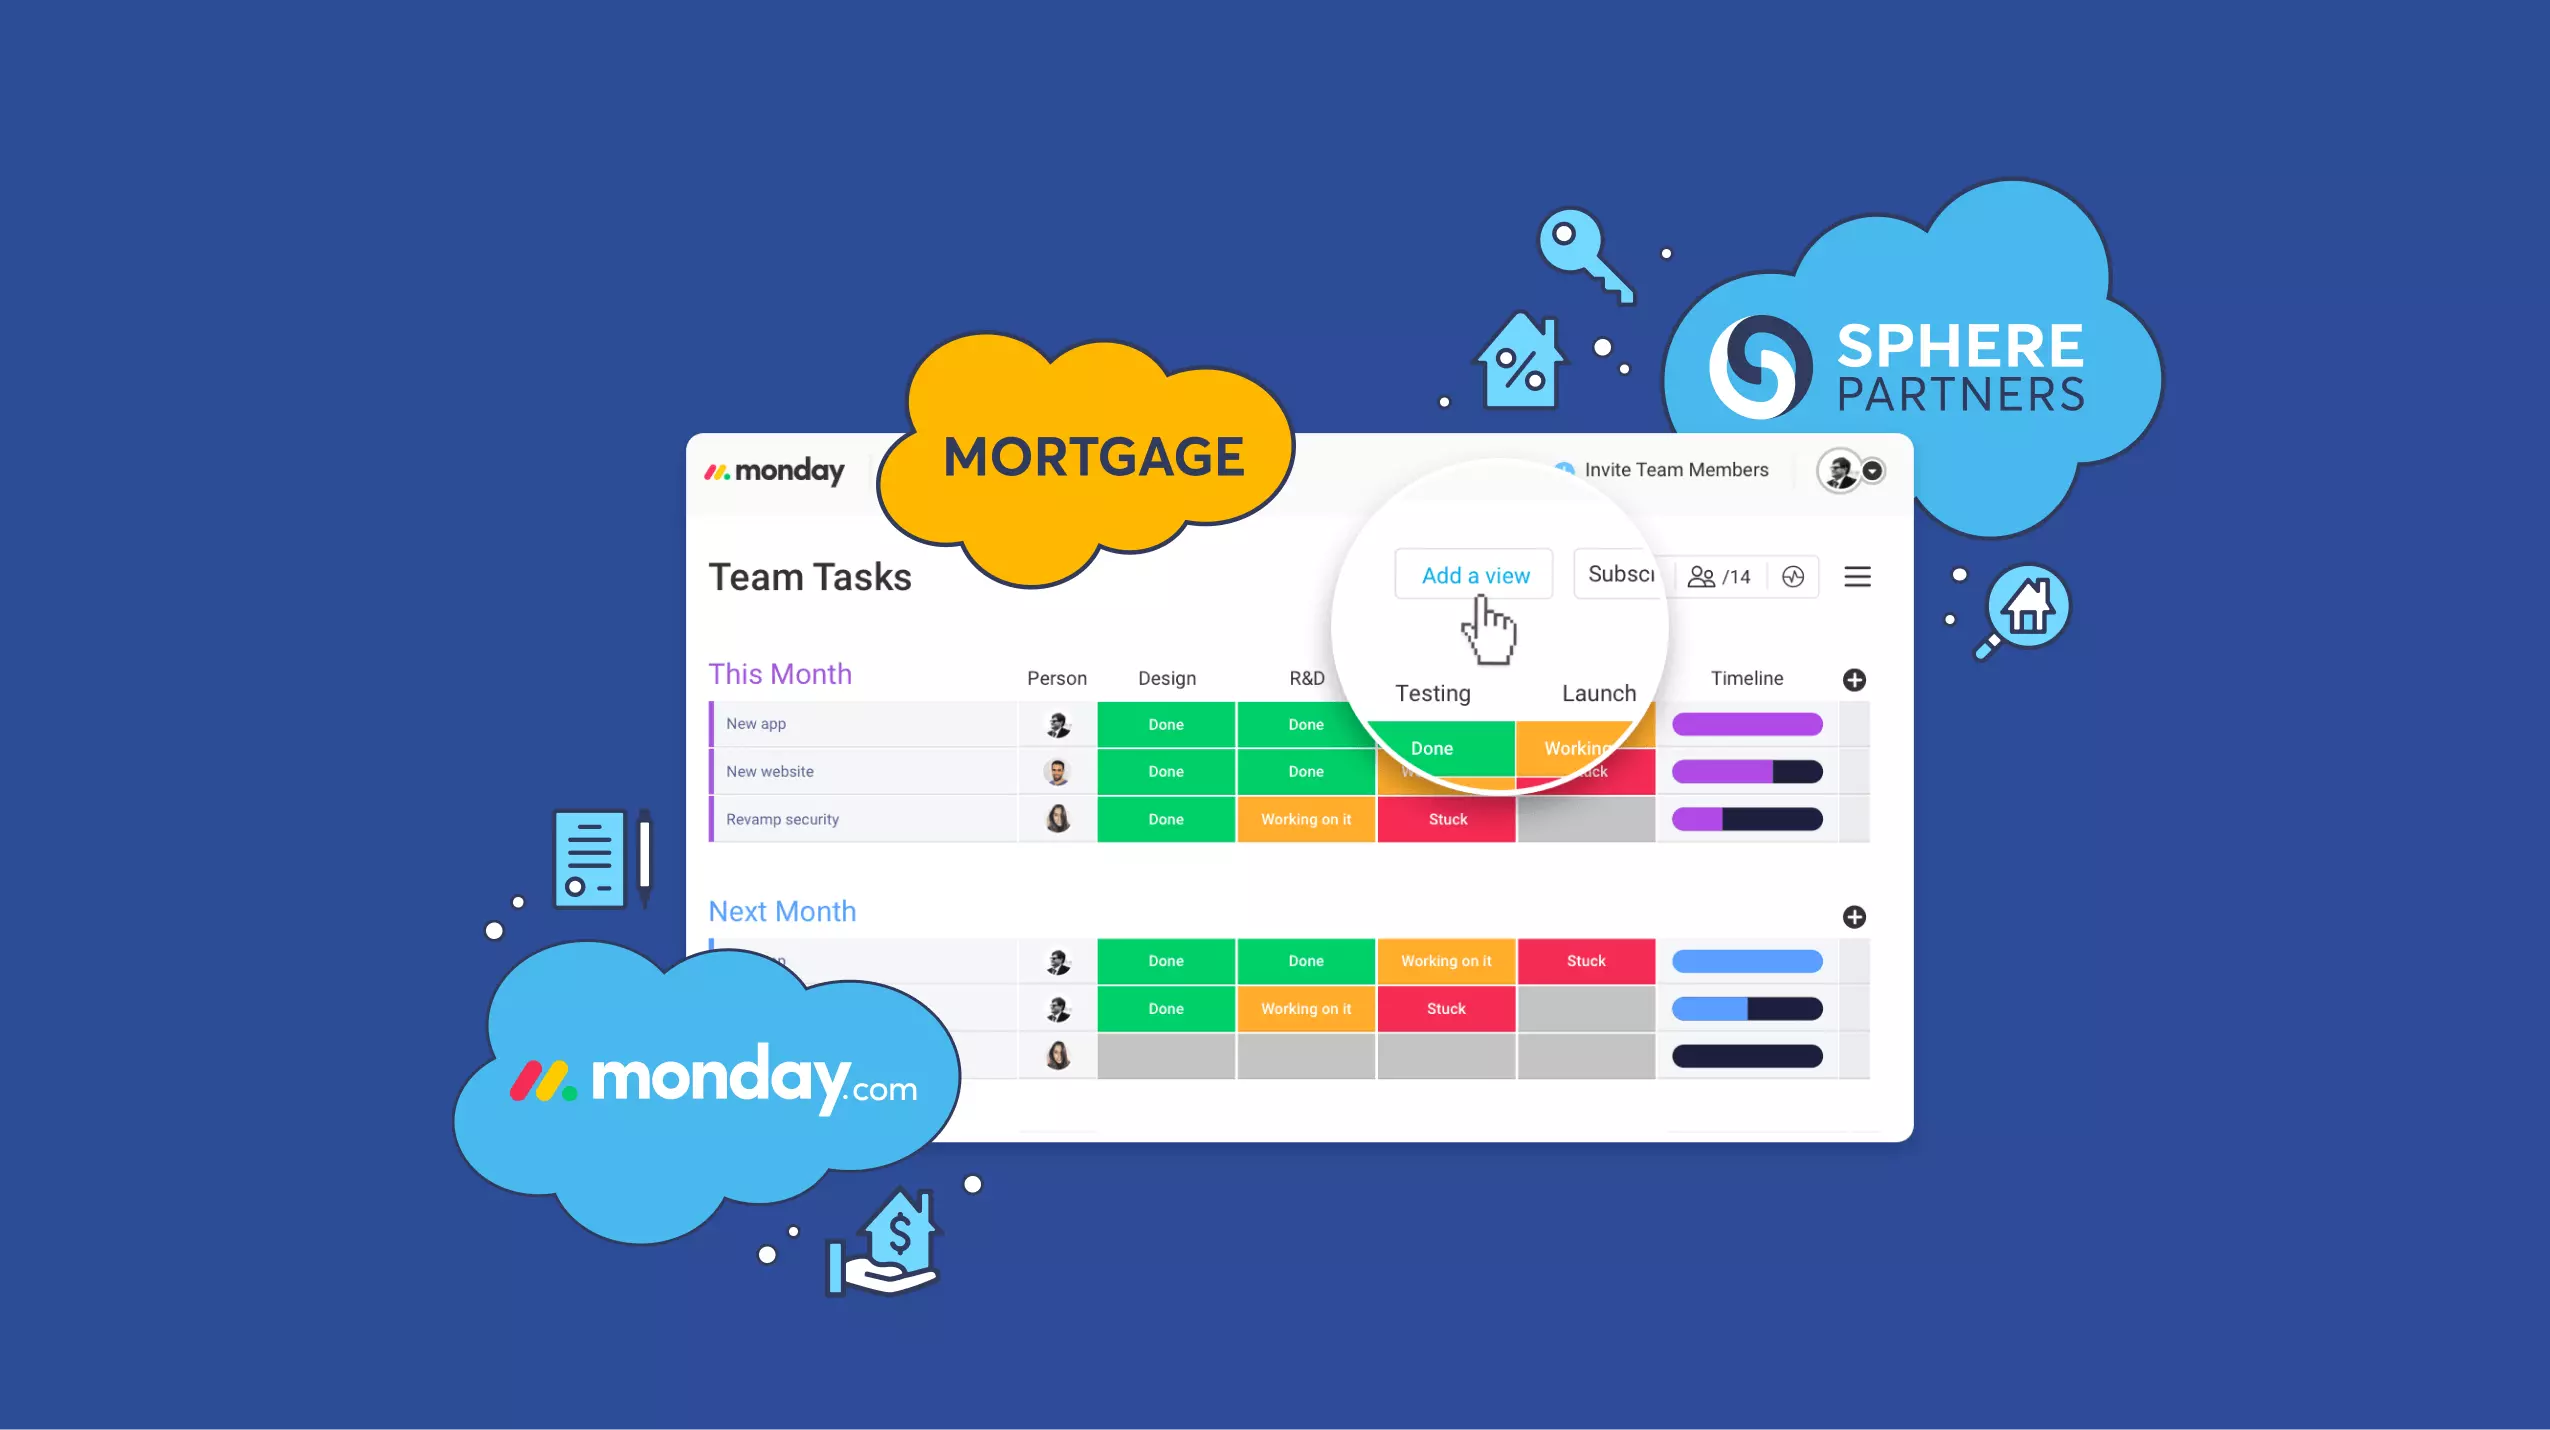 Mortgage lender hires Sphere Partners to streamline underwriting process with monday.com